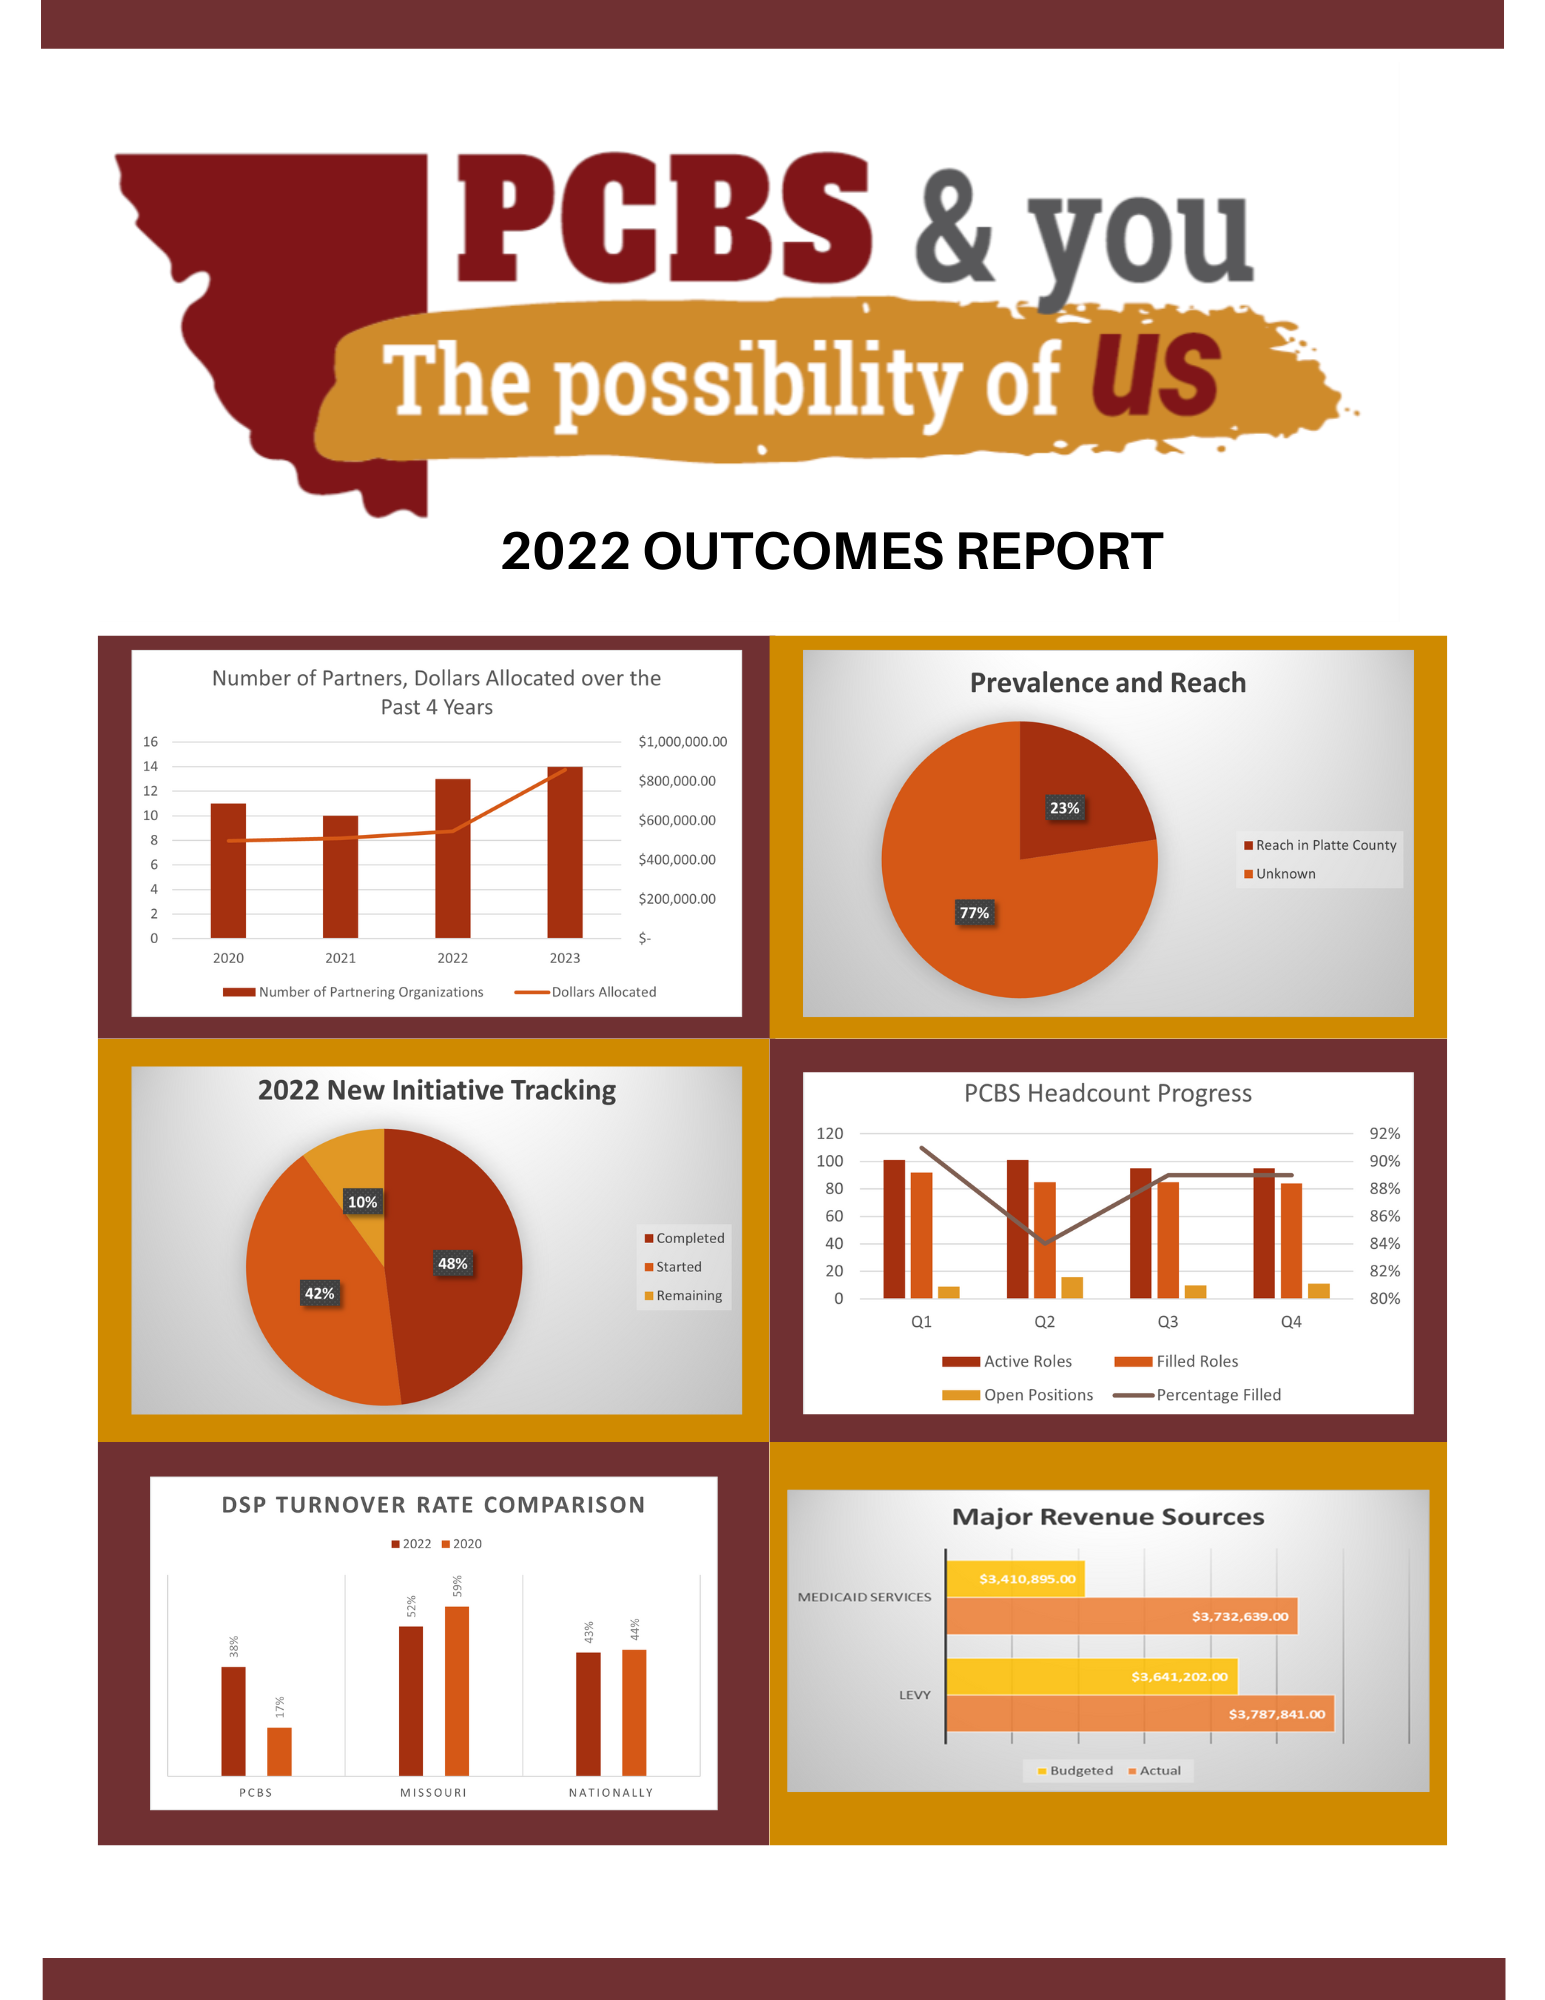 2022 Outcomes Report click to open